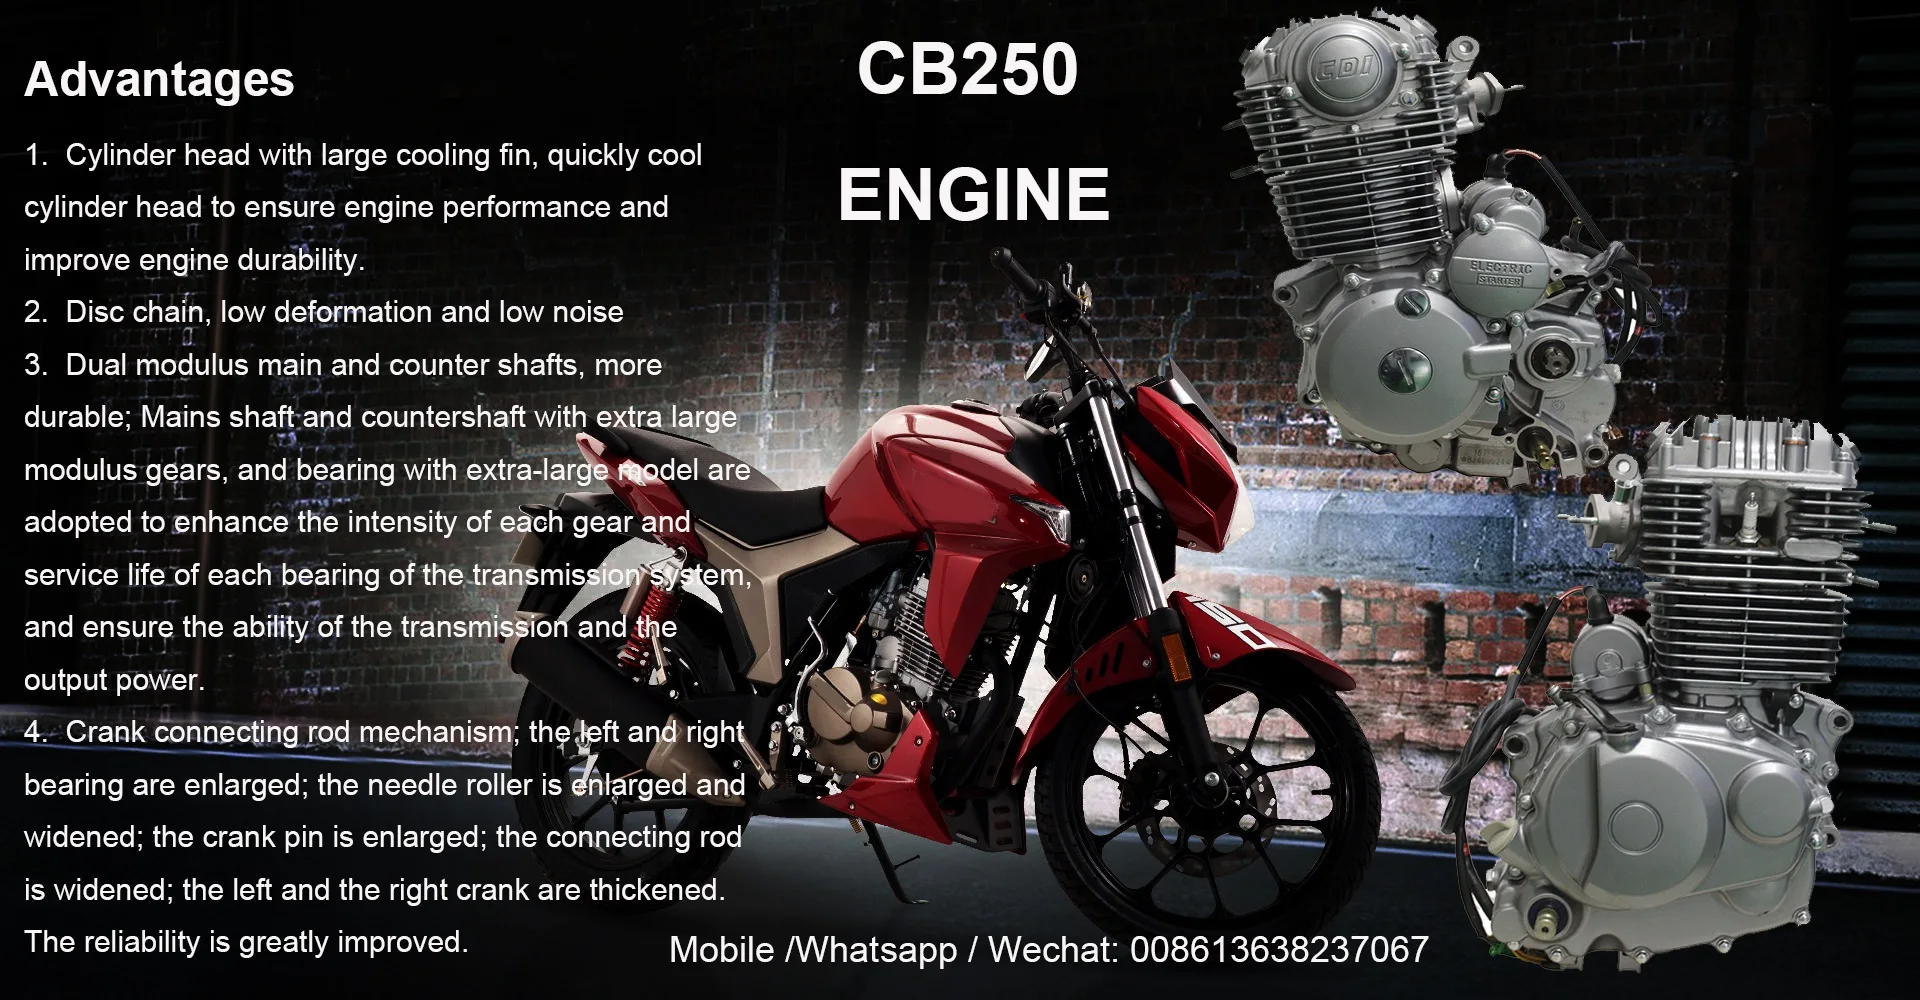 2022 New Arrival Air Cooled 4 Strokes Cb200 200cc Motorcycle Engine Assembly  For Sales - Buy Cb200 Motorcycle Engine,Cb200 200cc Motorcycle Engine  Assembly,Cb200 200cc Motorcycle Engine Product on 